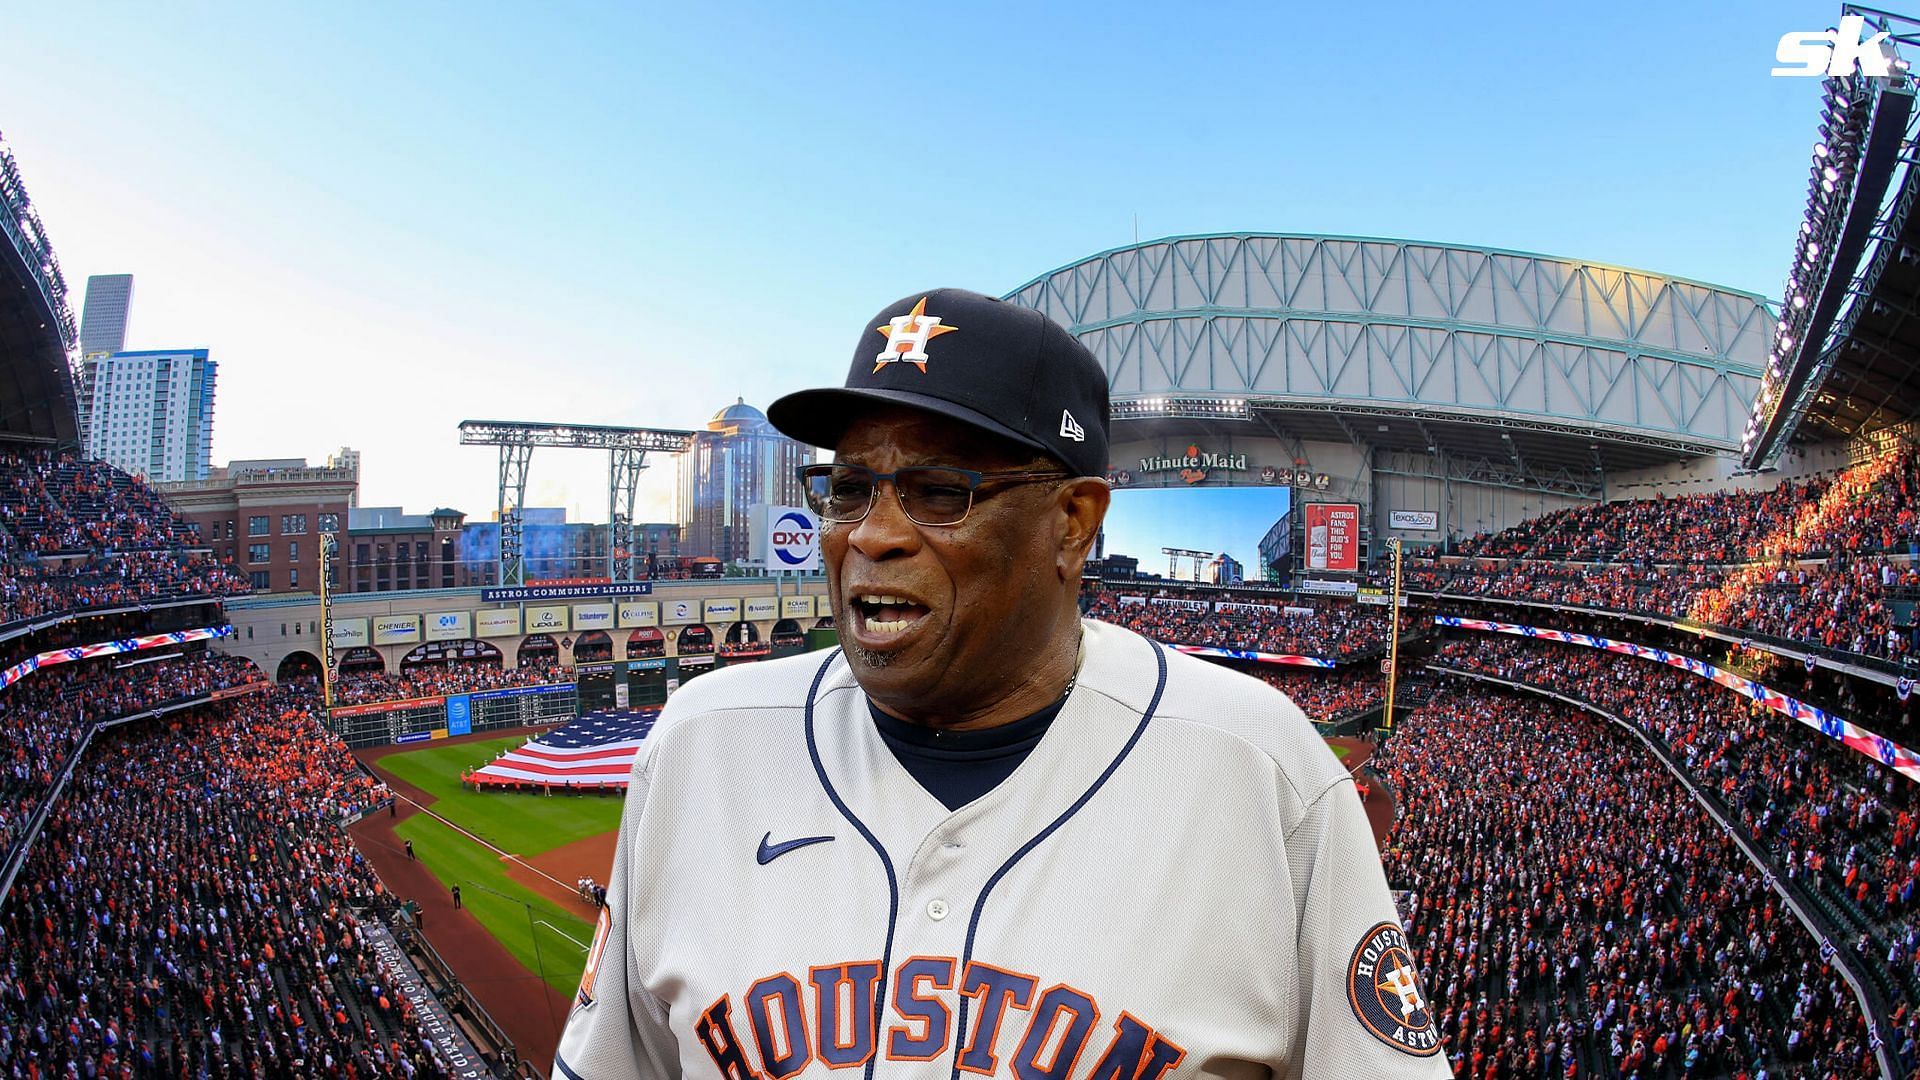 Dusty Baker reflected on his time with Astros